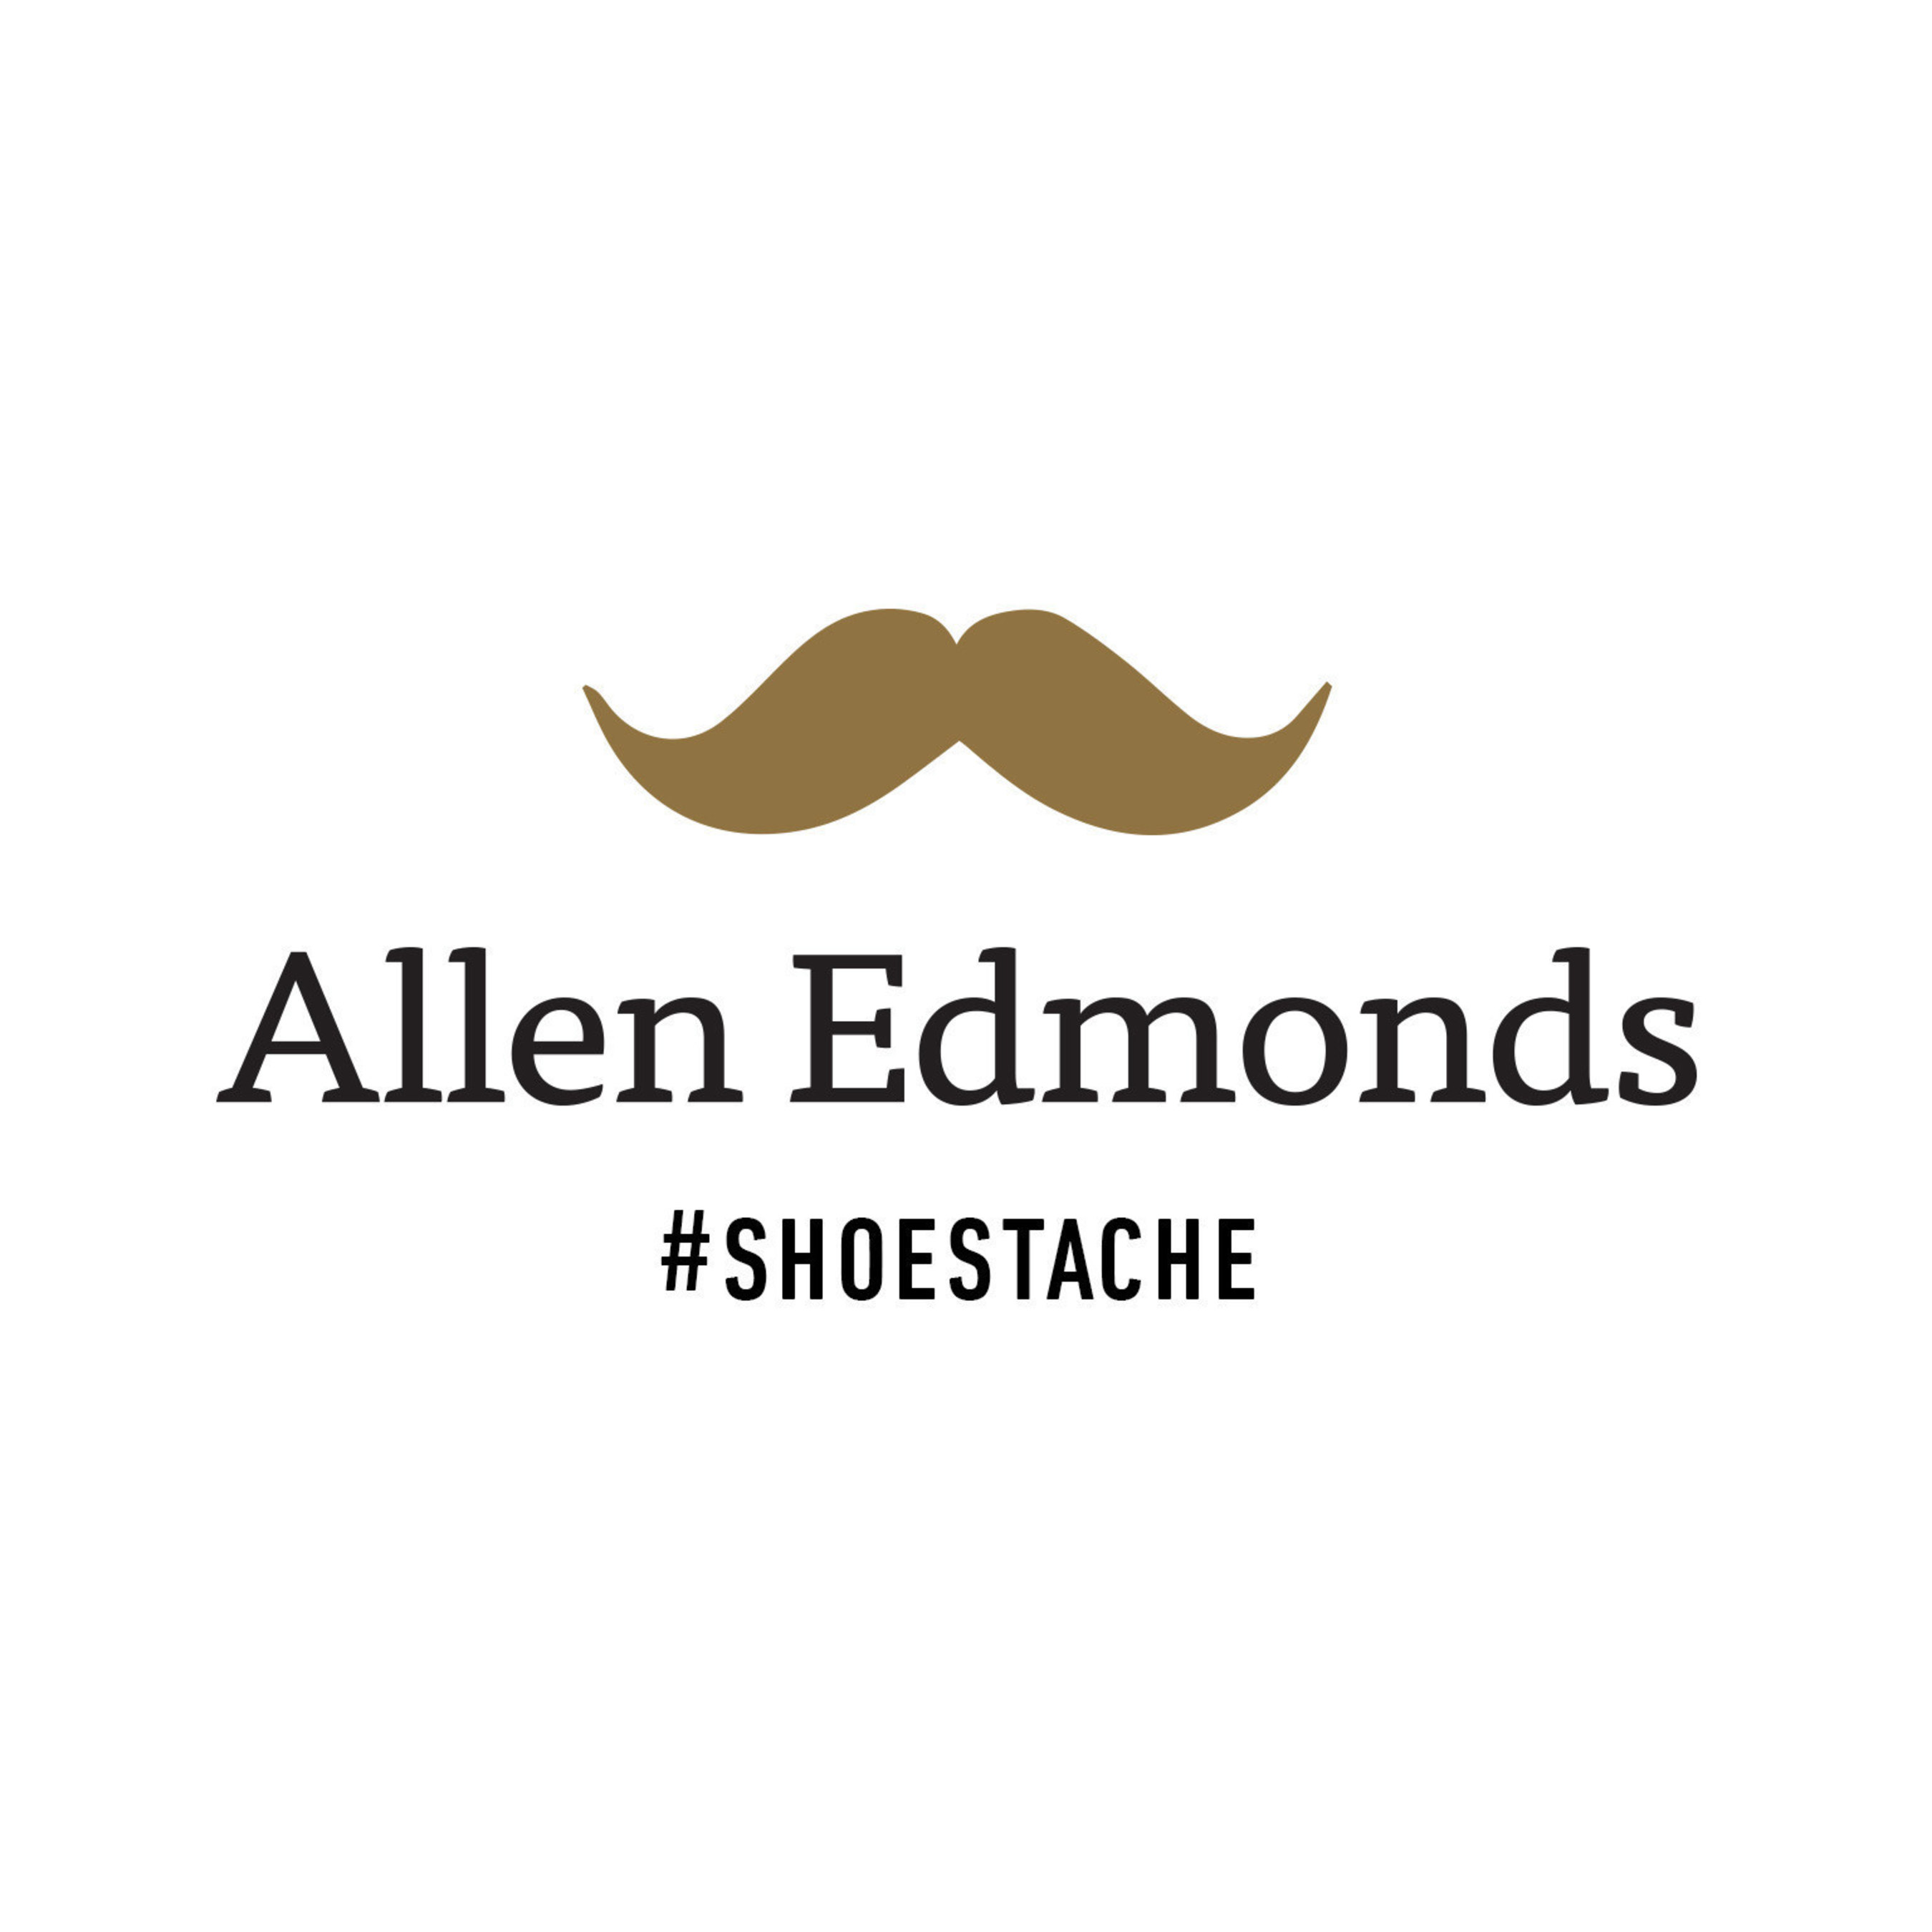 There are free shoe-kilties available at each Allen Edmonds store location. Pick up a kiltie and post of a photo of it to Instagram or Twitter using #ShoeStache to help spread awareness of this great cause.